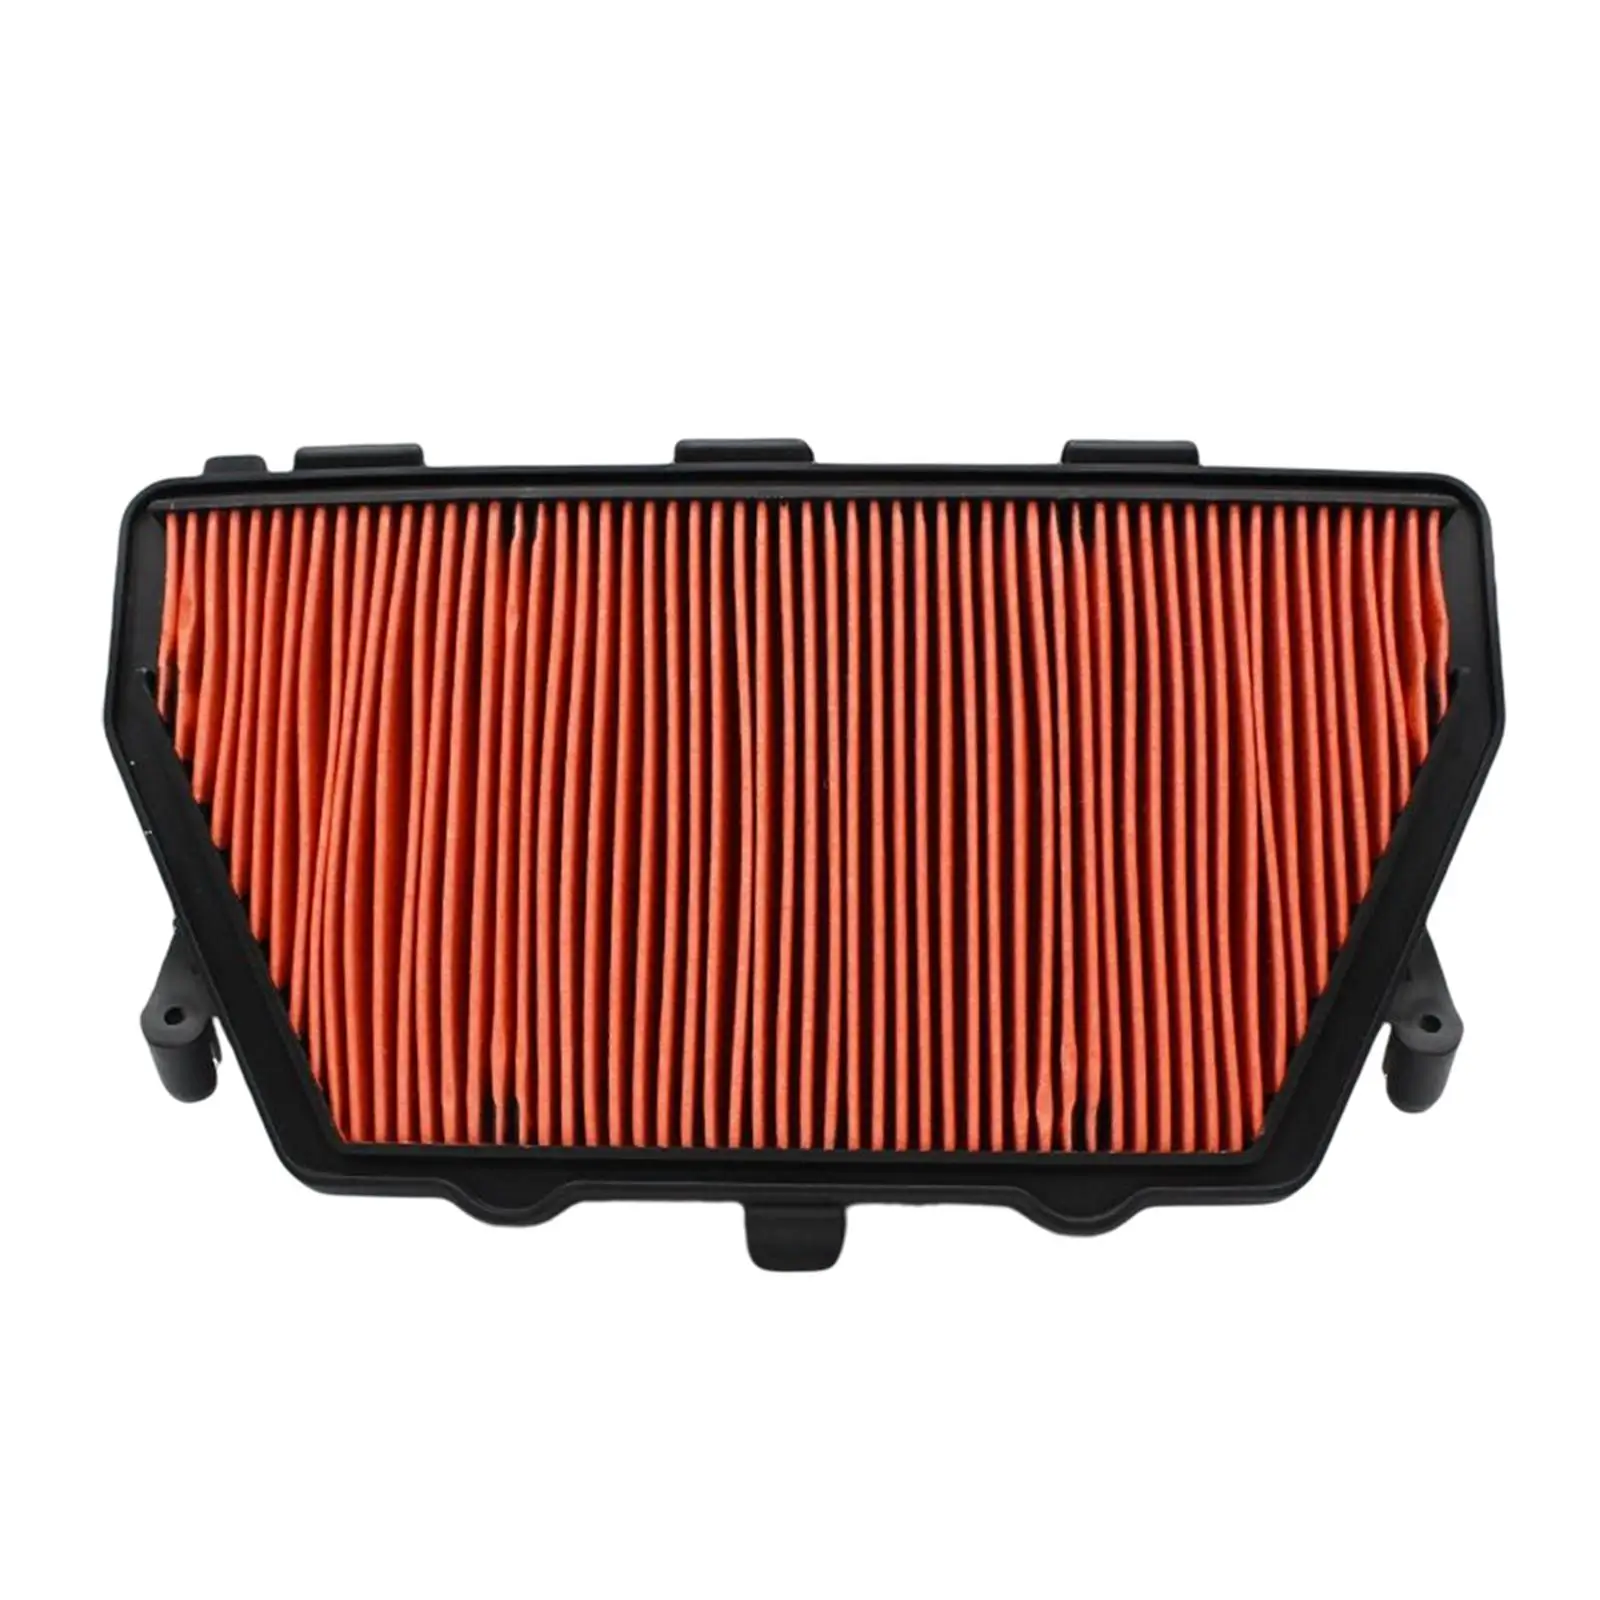 Air Filter 17210-Mfl-000 Replace for CBR1000RA ABS CBR1000Rr SP CBR1000Rr ABS Motorcycle Parts